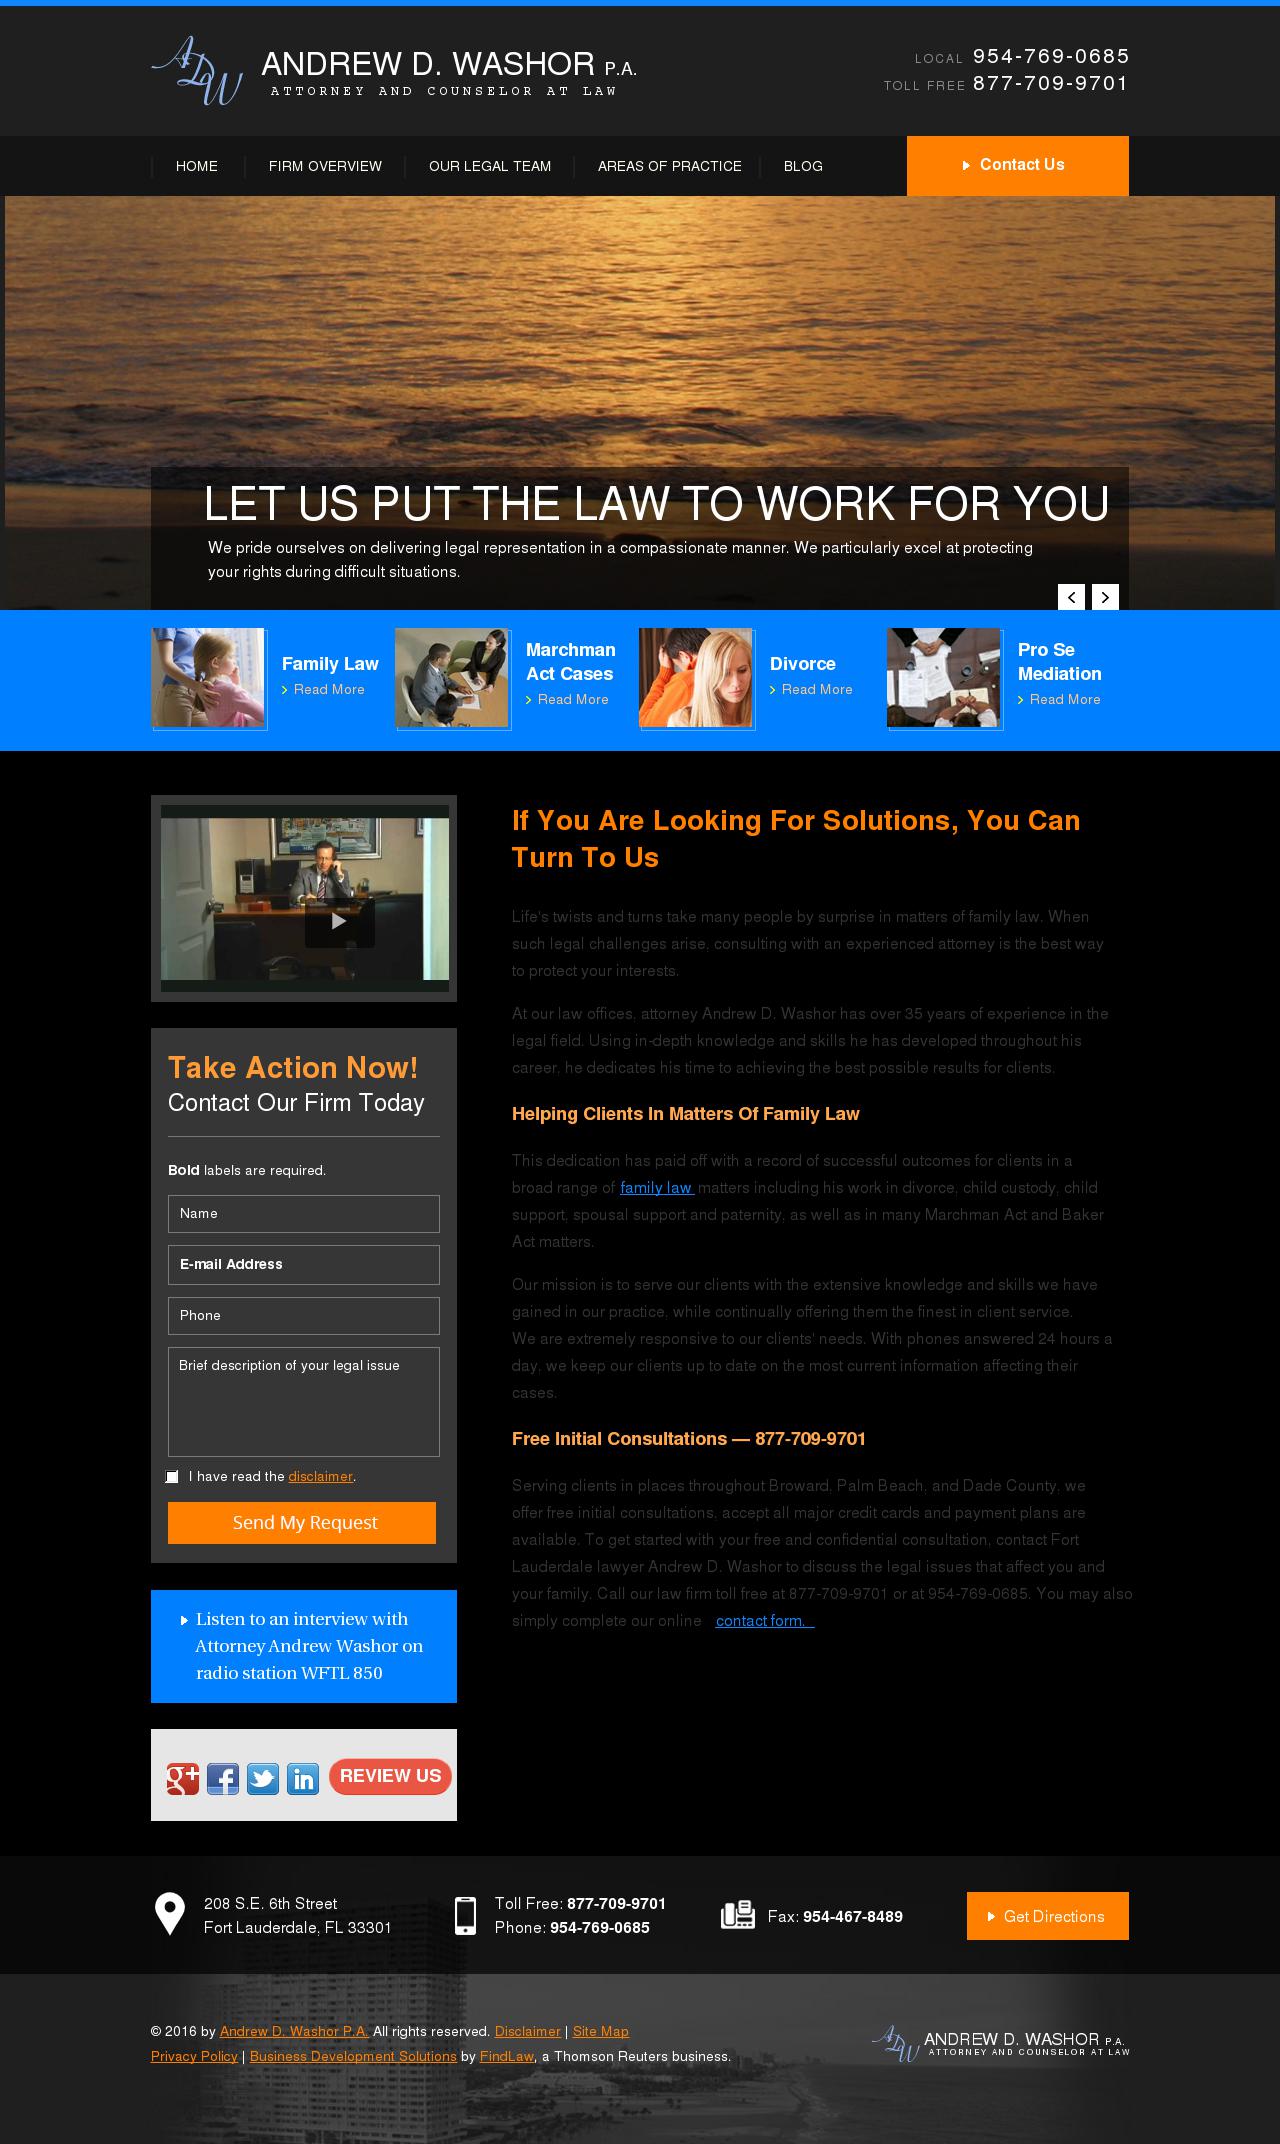 Andrew D. Washor P.A. - Fort Lauderdale FL Lawyers